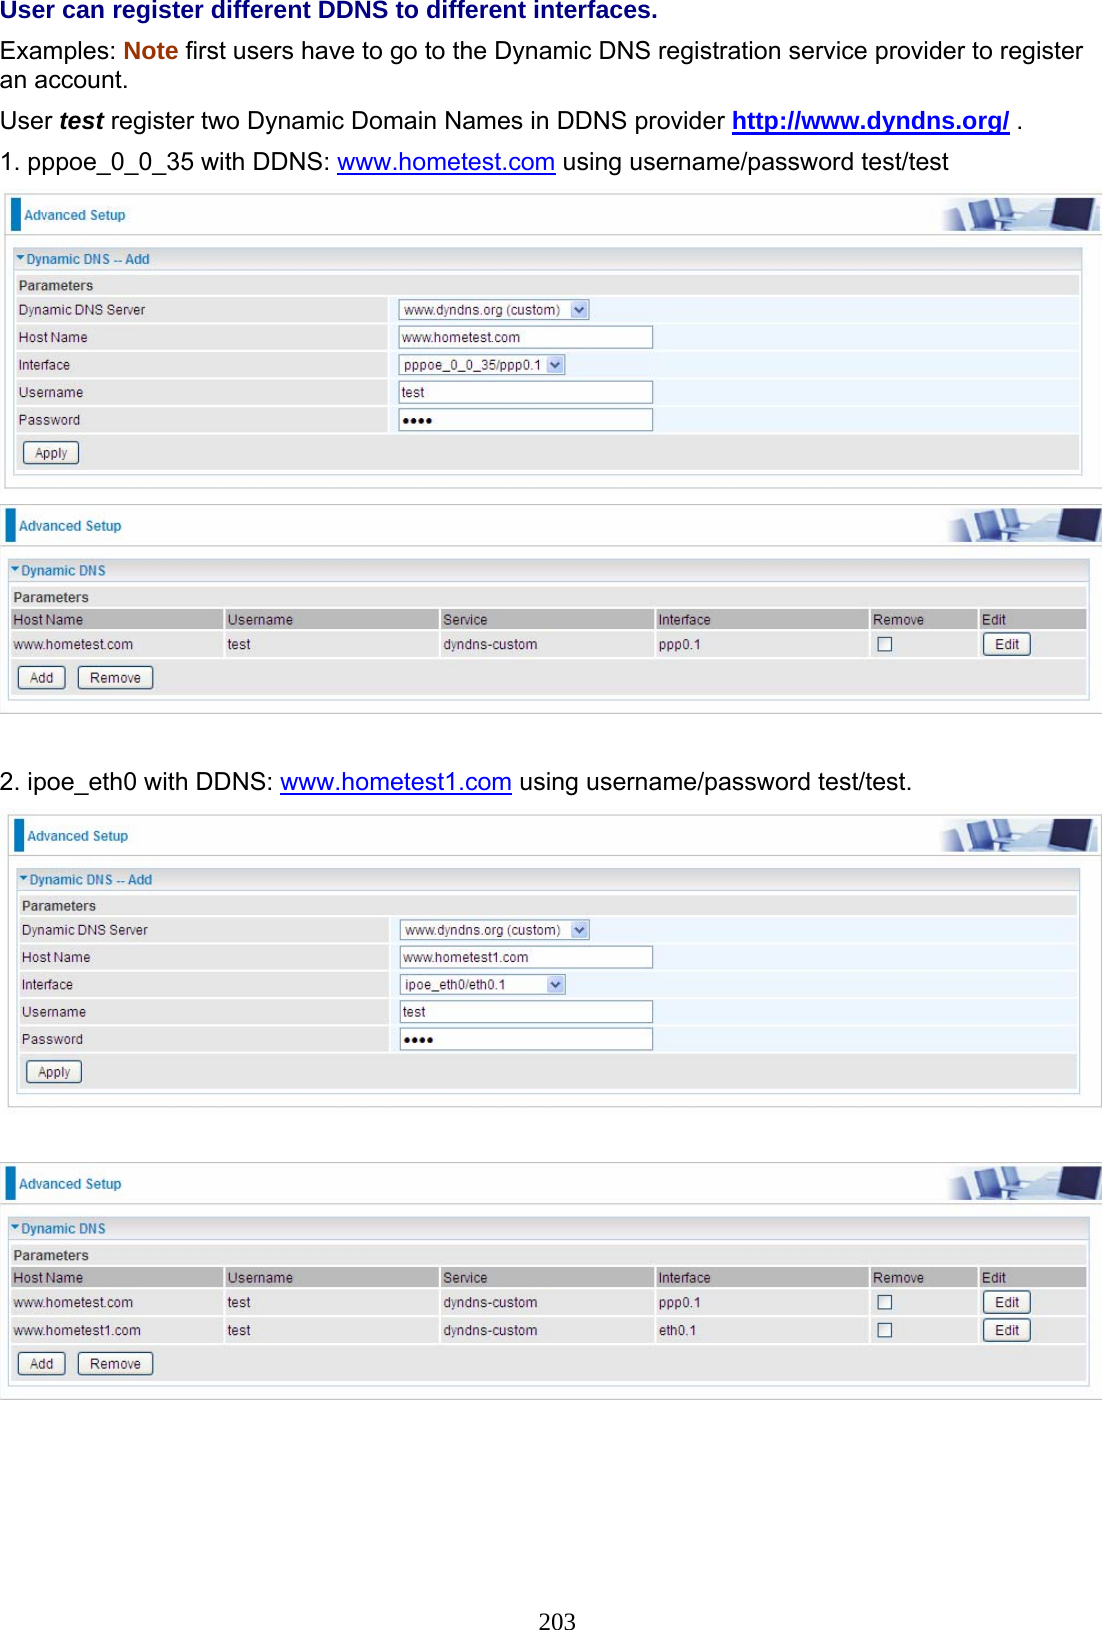 203 User can register different DDNS to different interfaces. Examples: Note first users have to go to the Dynamic DNS registration service provider to register an account. User test register two Dynamic Domain Names in DDNS provider http://www.dyndns.org/ . 1. pppoe_0_0_35 with DDNS: www.hometest.com using username/password test/test    2. ipoe_eth0 with DDNS: www.hometest1.com using username/password test/test.     